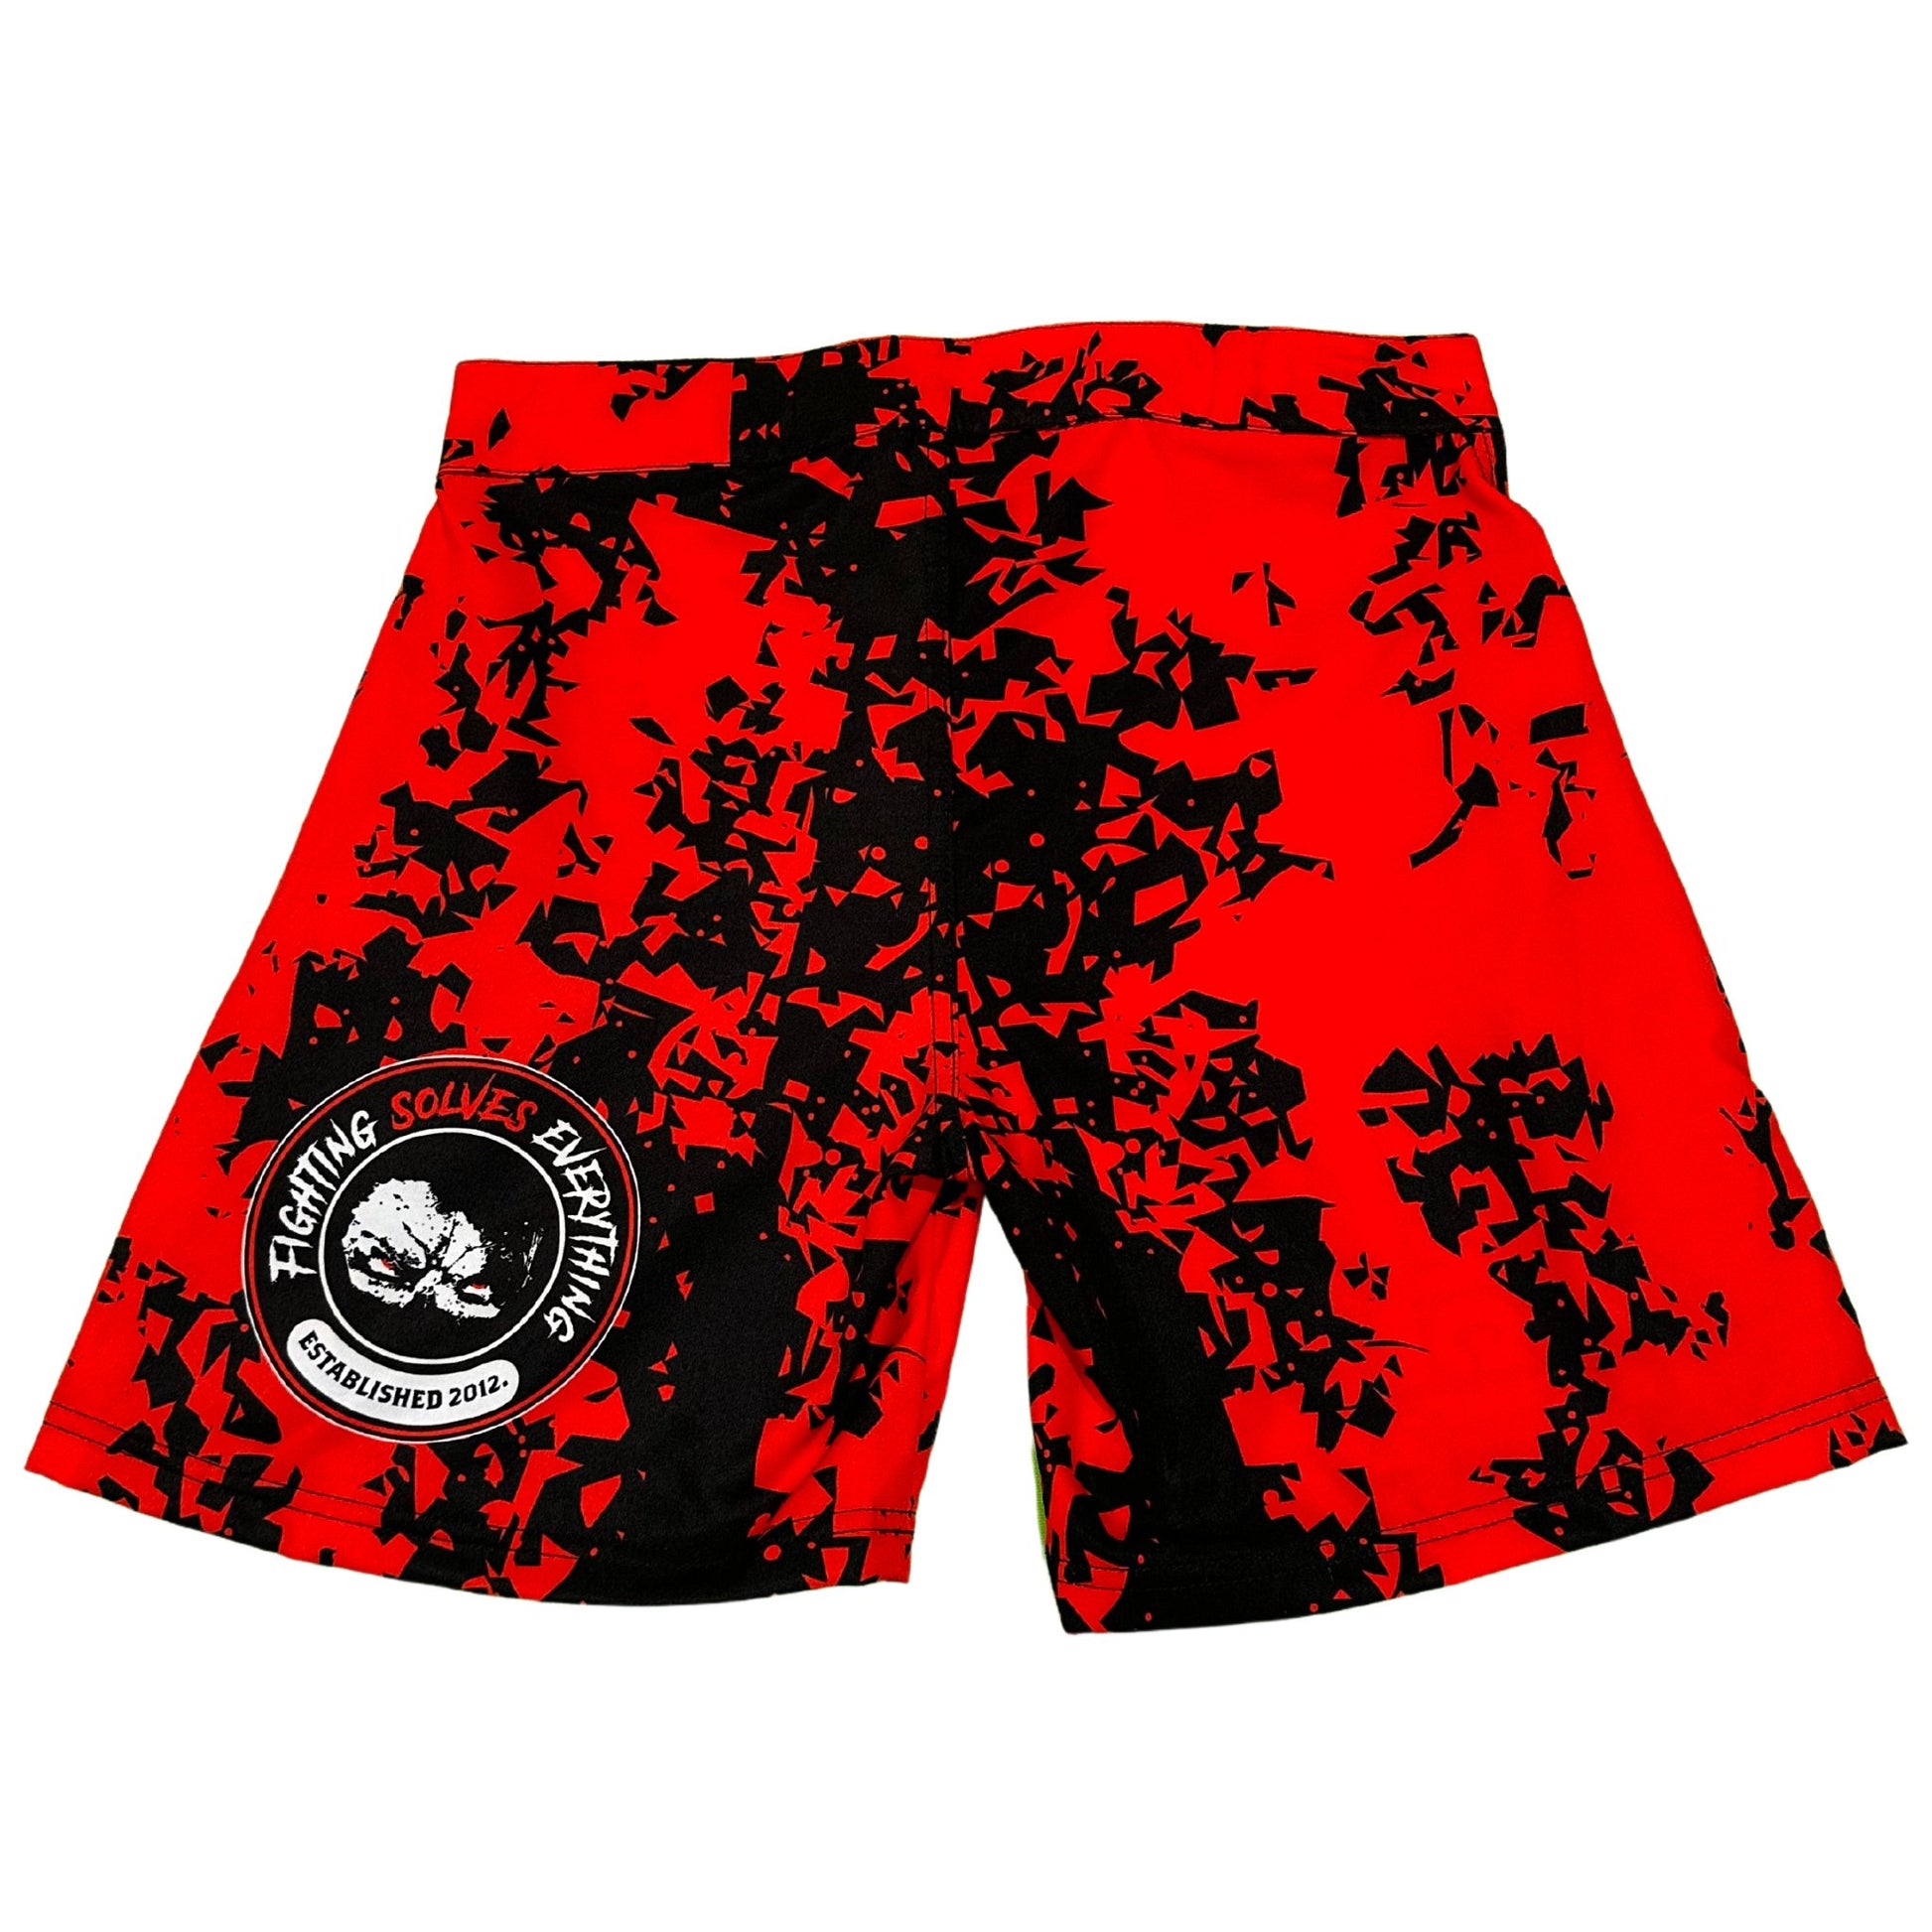 Fighting Solves Everything Camo Fight Shorts - Red & White, Black & White Variants - Las Vegas Combat Academy